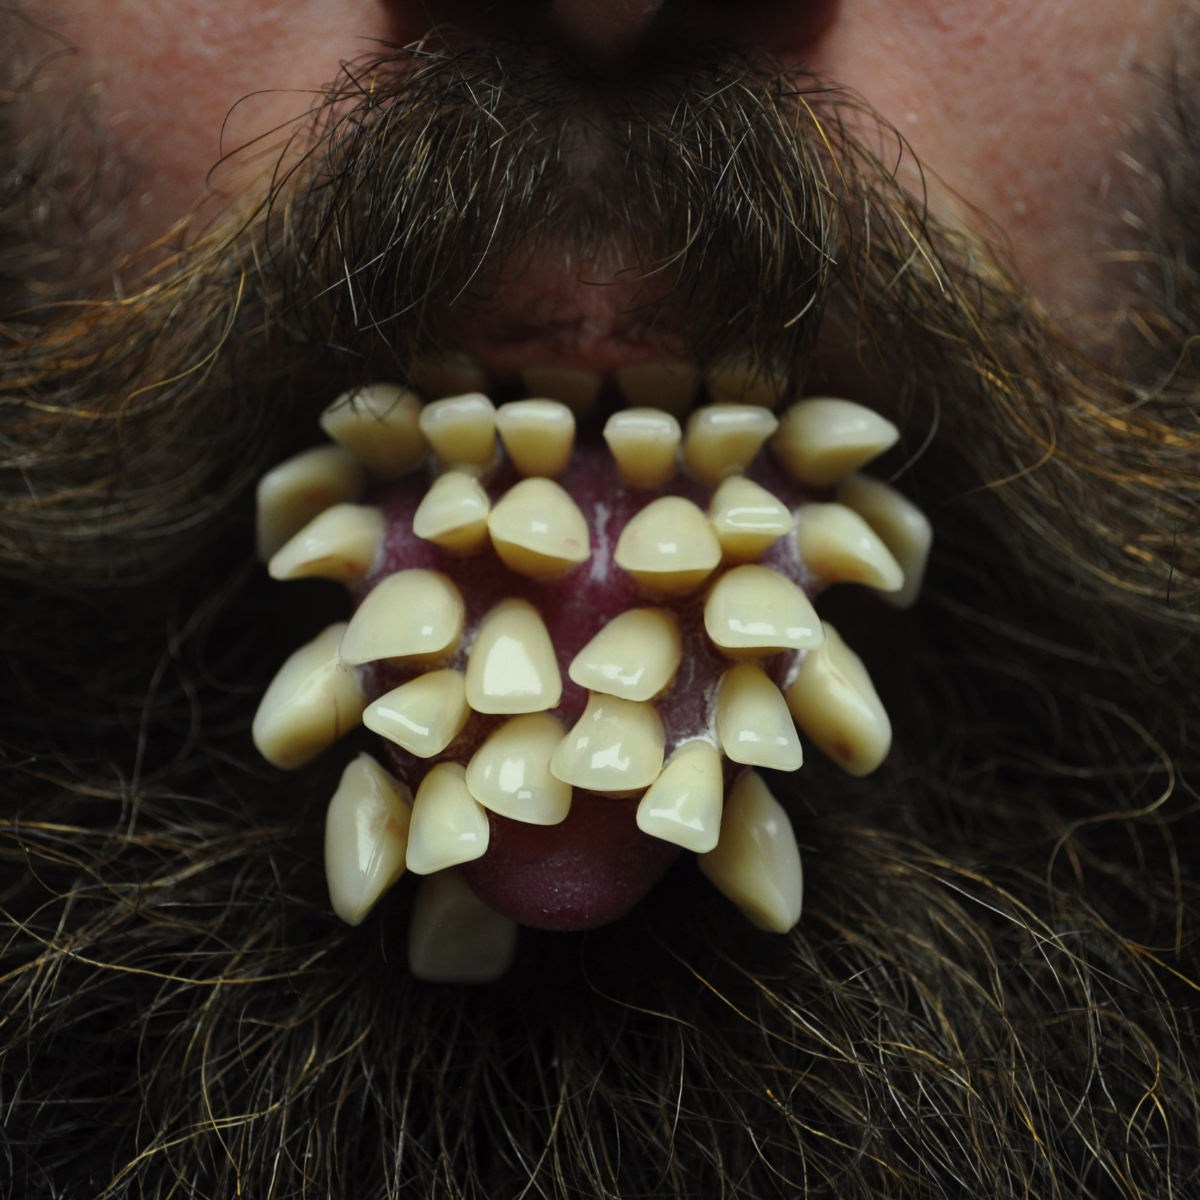 Matteo Ingrao, sculpture, art - Photo of tooth covered tongue poking out of a bearded human face